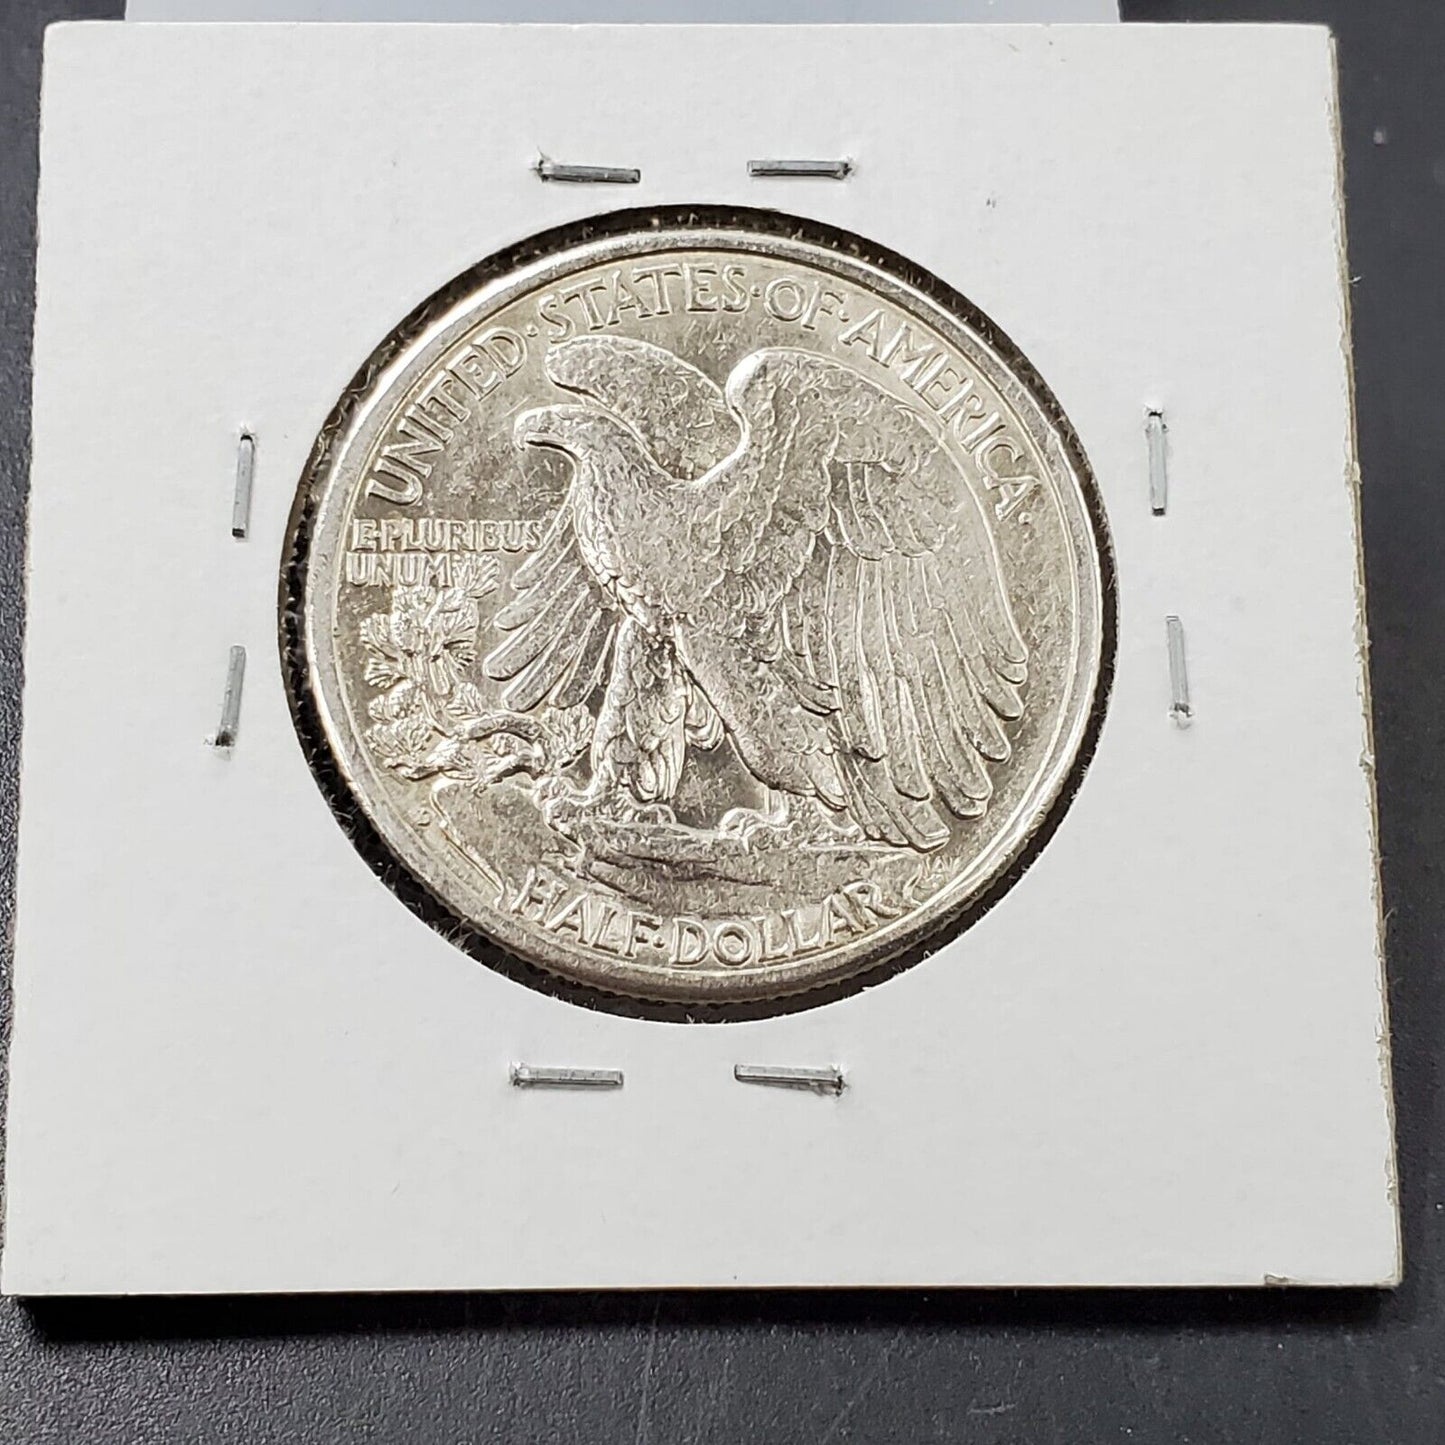 1942 D/D Walking Liberty Silver Eagle 90% Coin RPM-004 Variety Coin